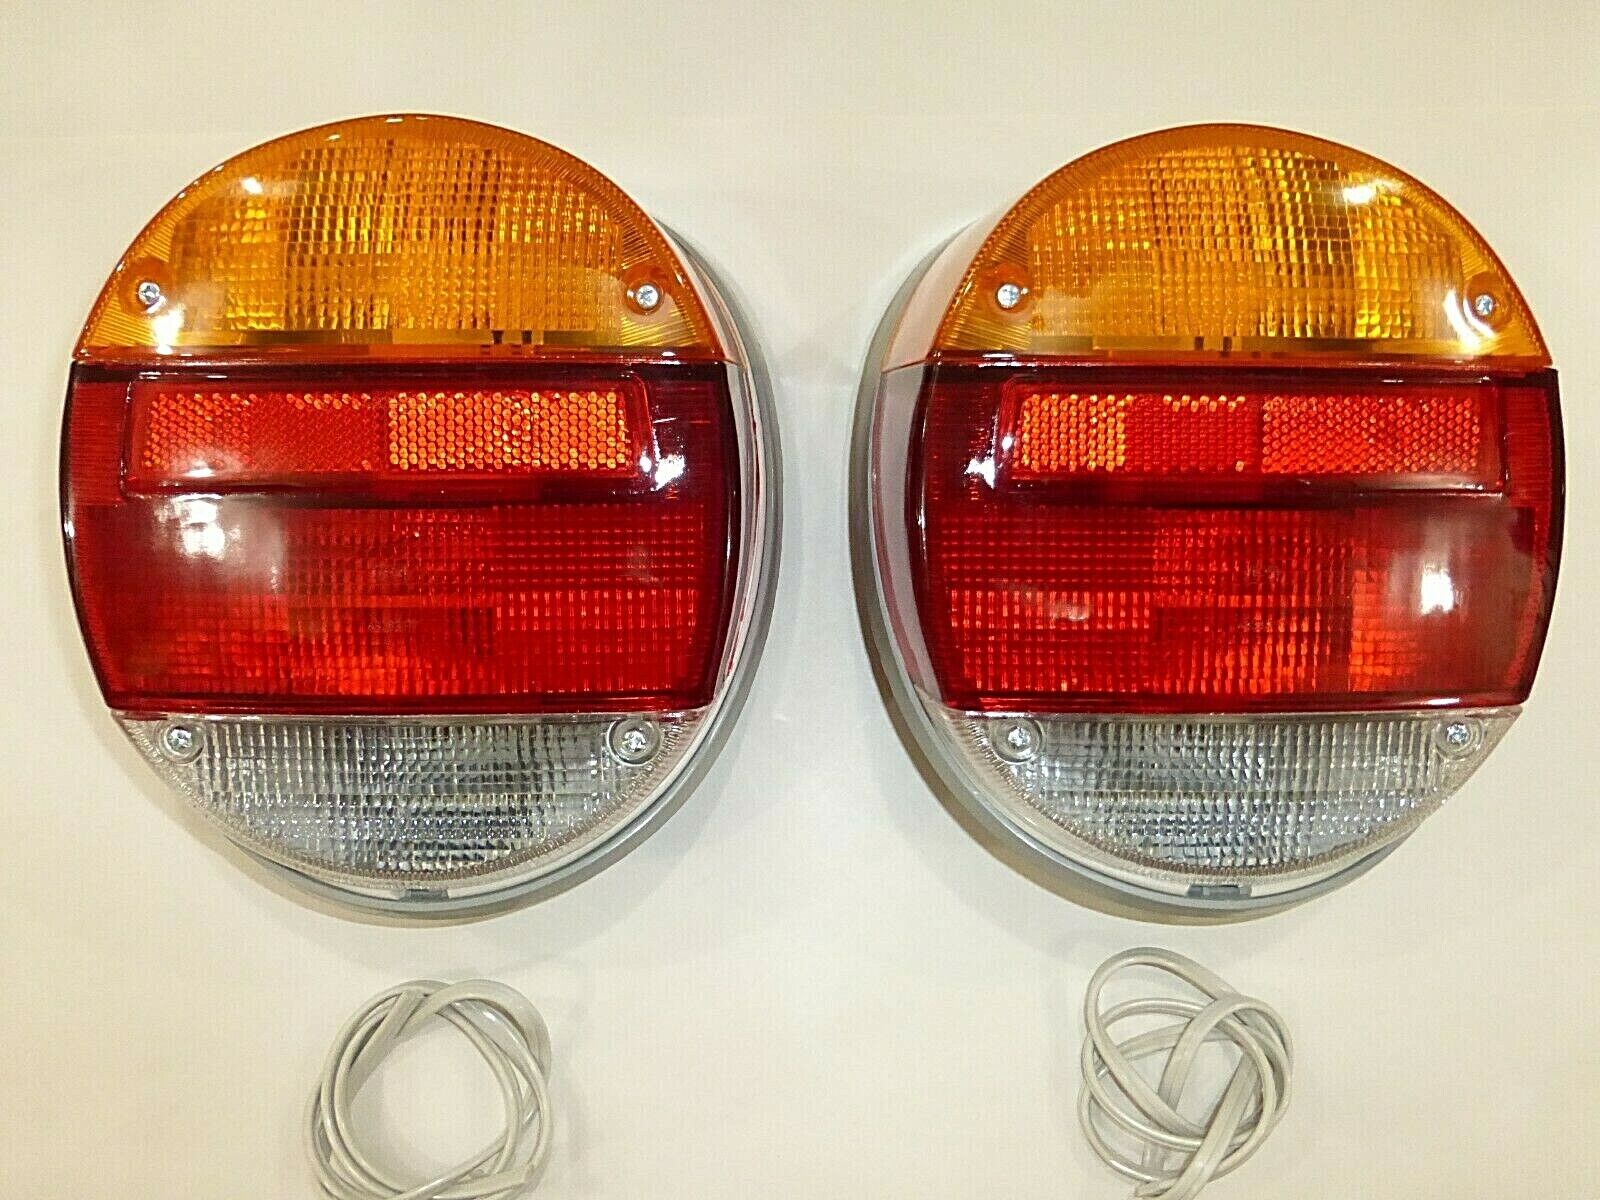 TAIL LIGHT ASSEMBLY FITS VOLKSWAGEN TYPE 1 VW BUG & SUPER BEETLE 1973-1979 PAIR